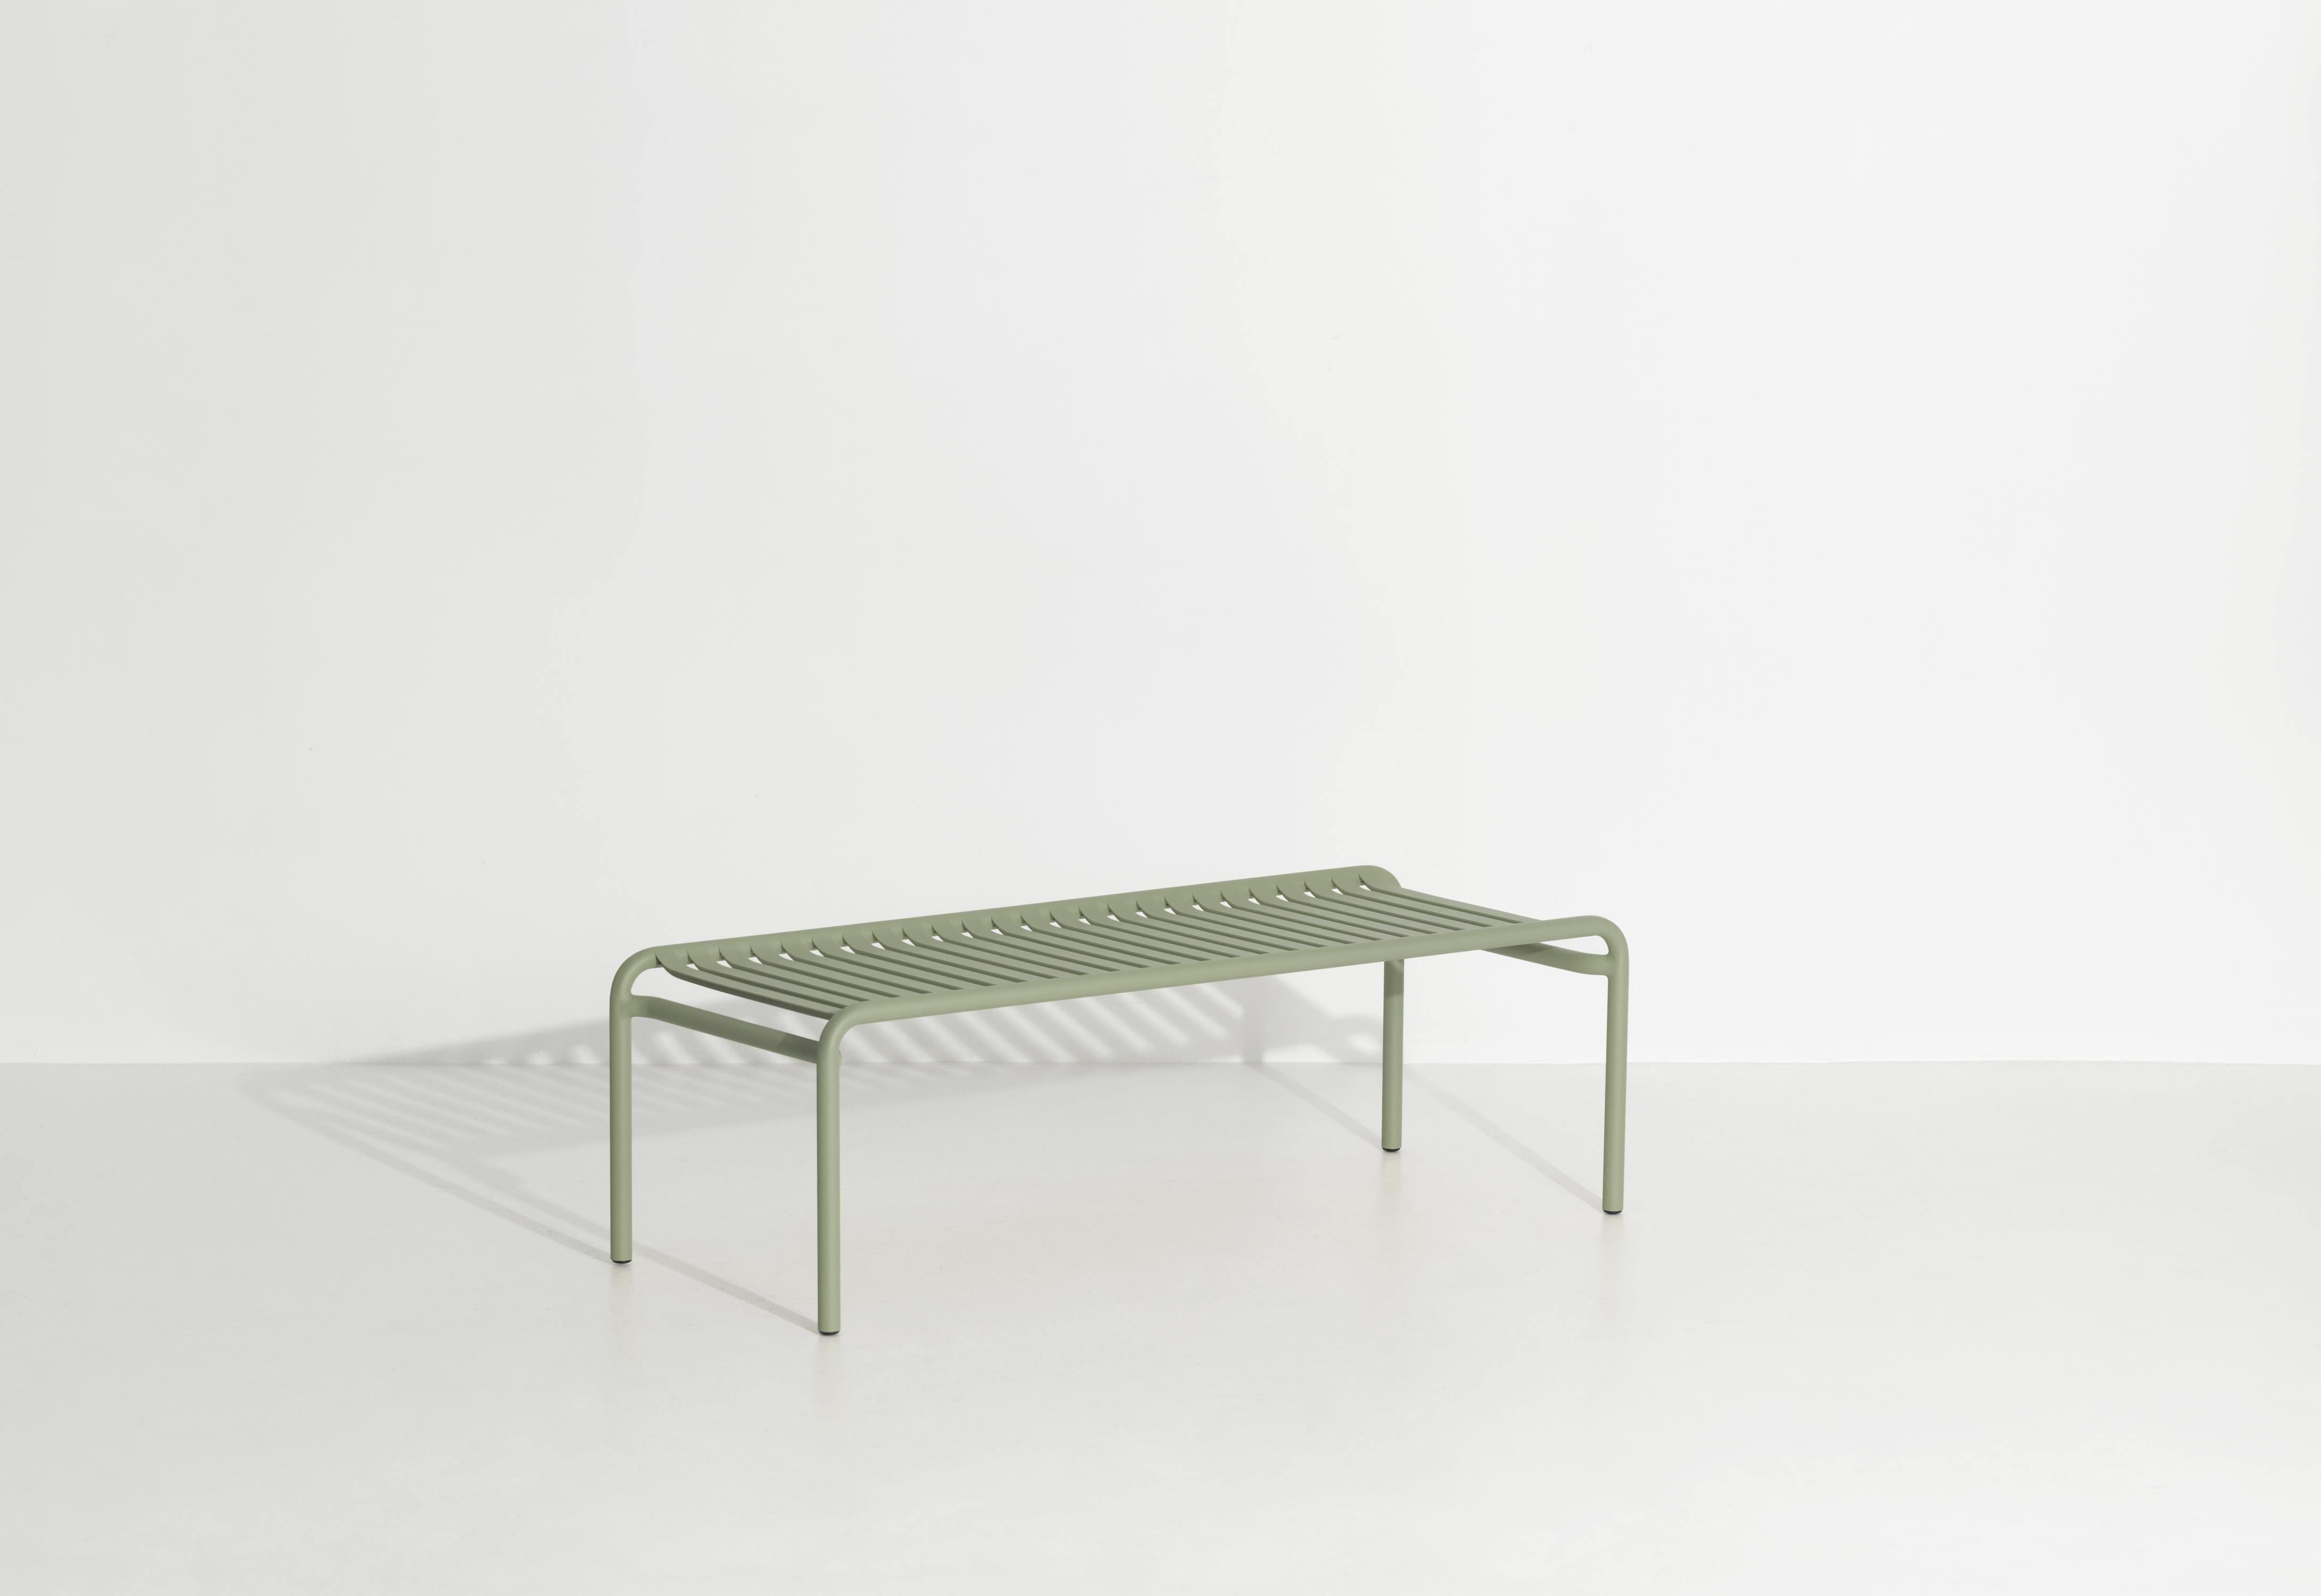 Petite Friture Week-End Long Coffee Table in Jade Green Aluminium, 2017 In New Condition For Sale In Brooklyn, NY